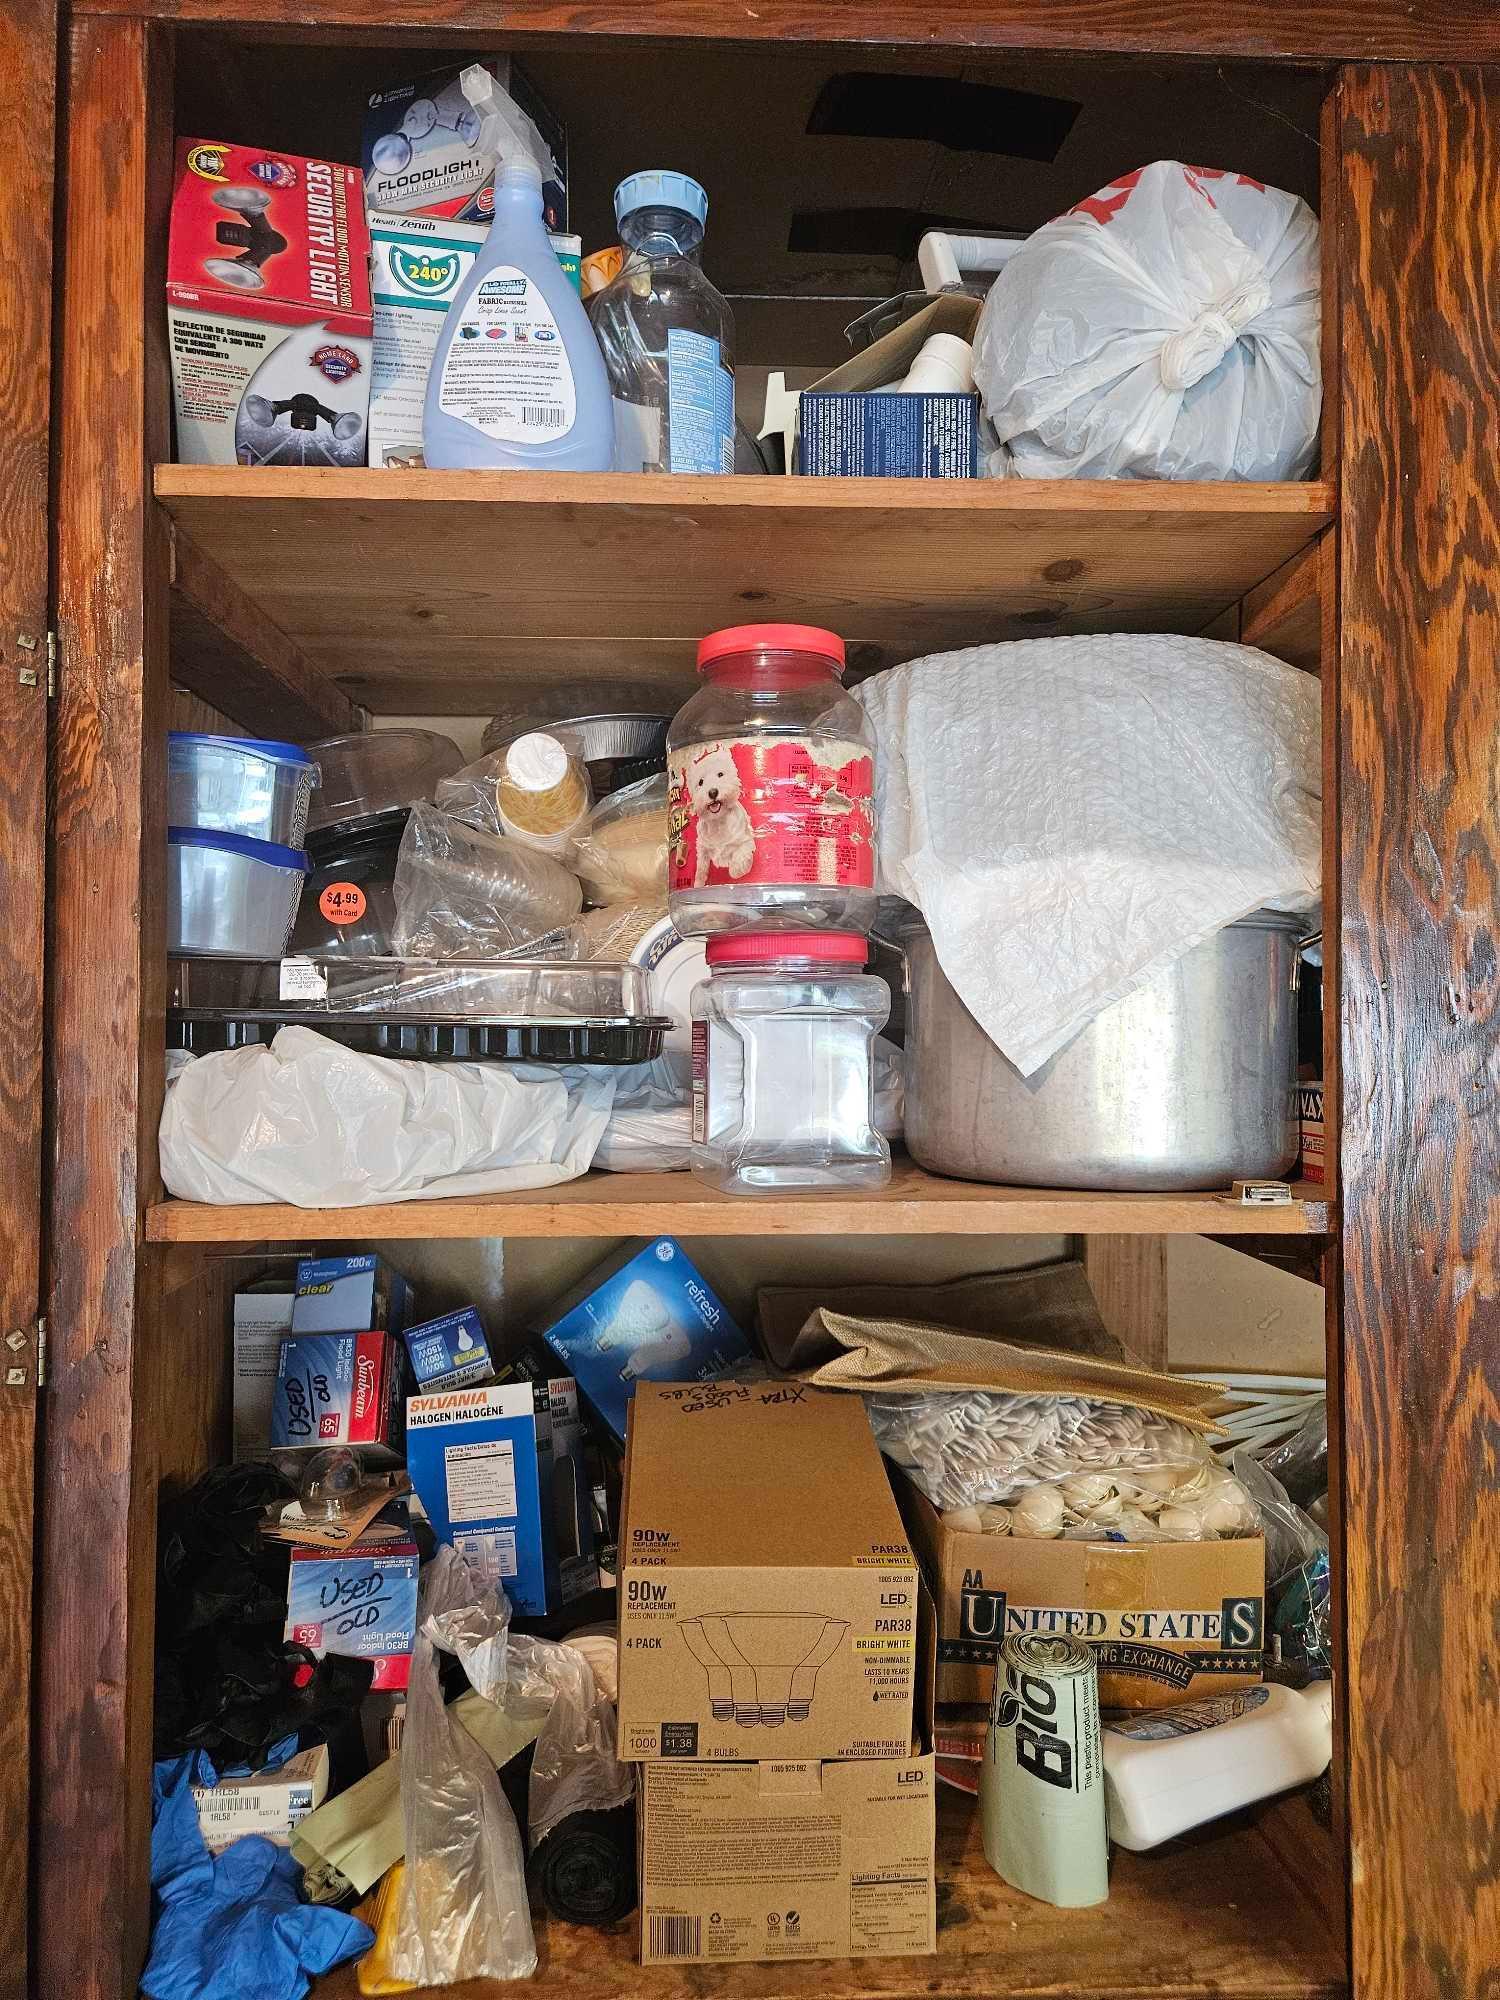 Cabinet contents including banners and vacuum cleaner on floor.